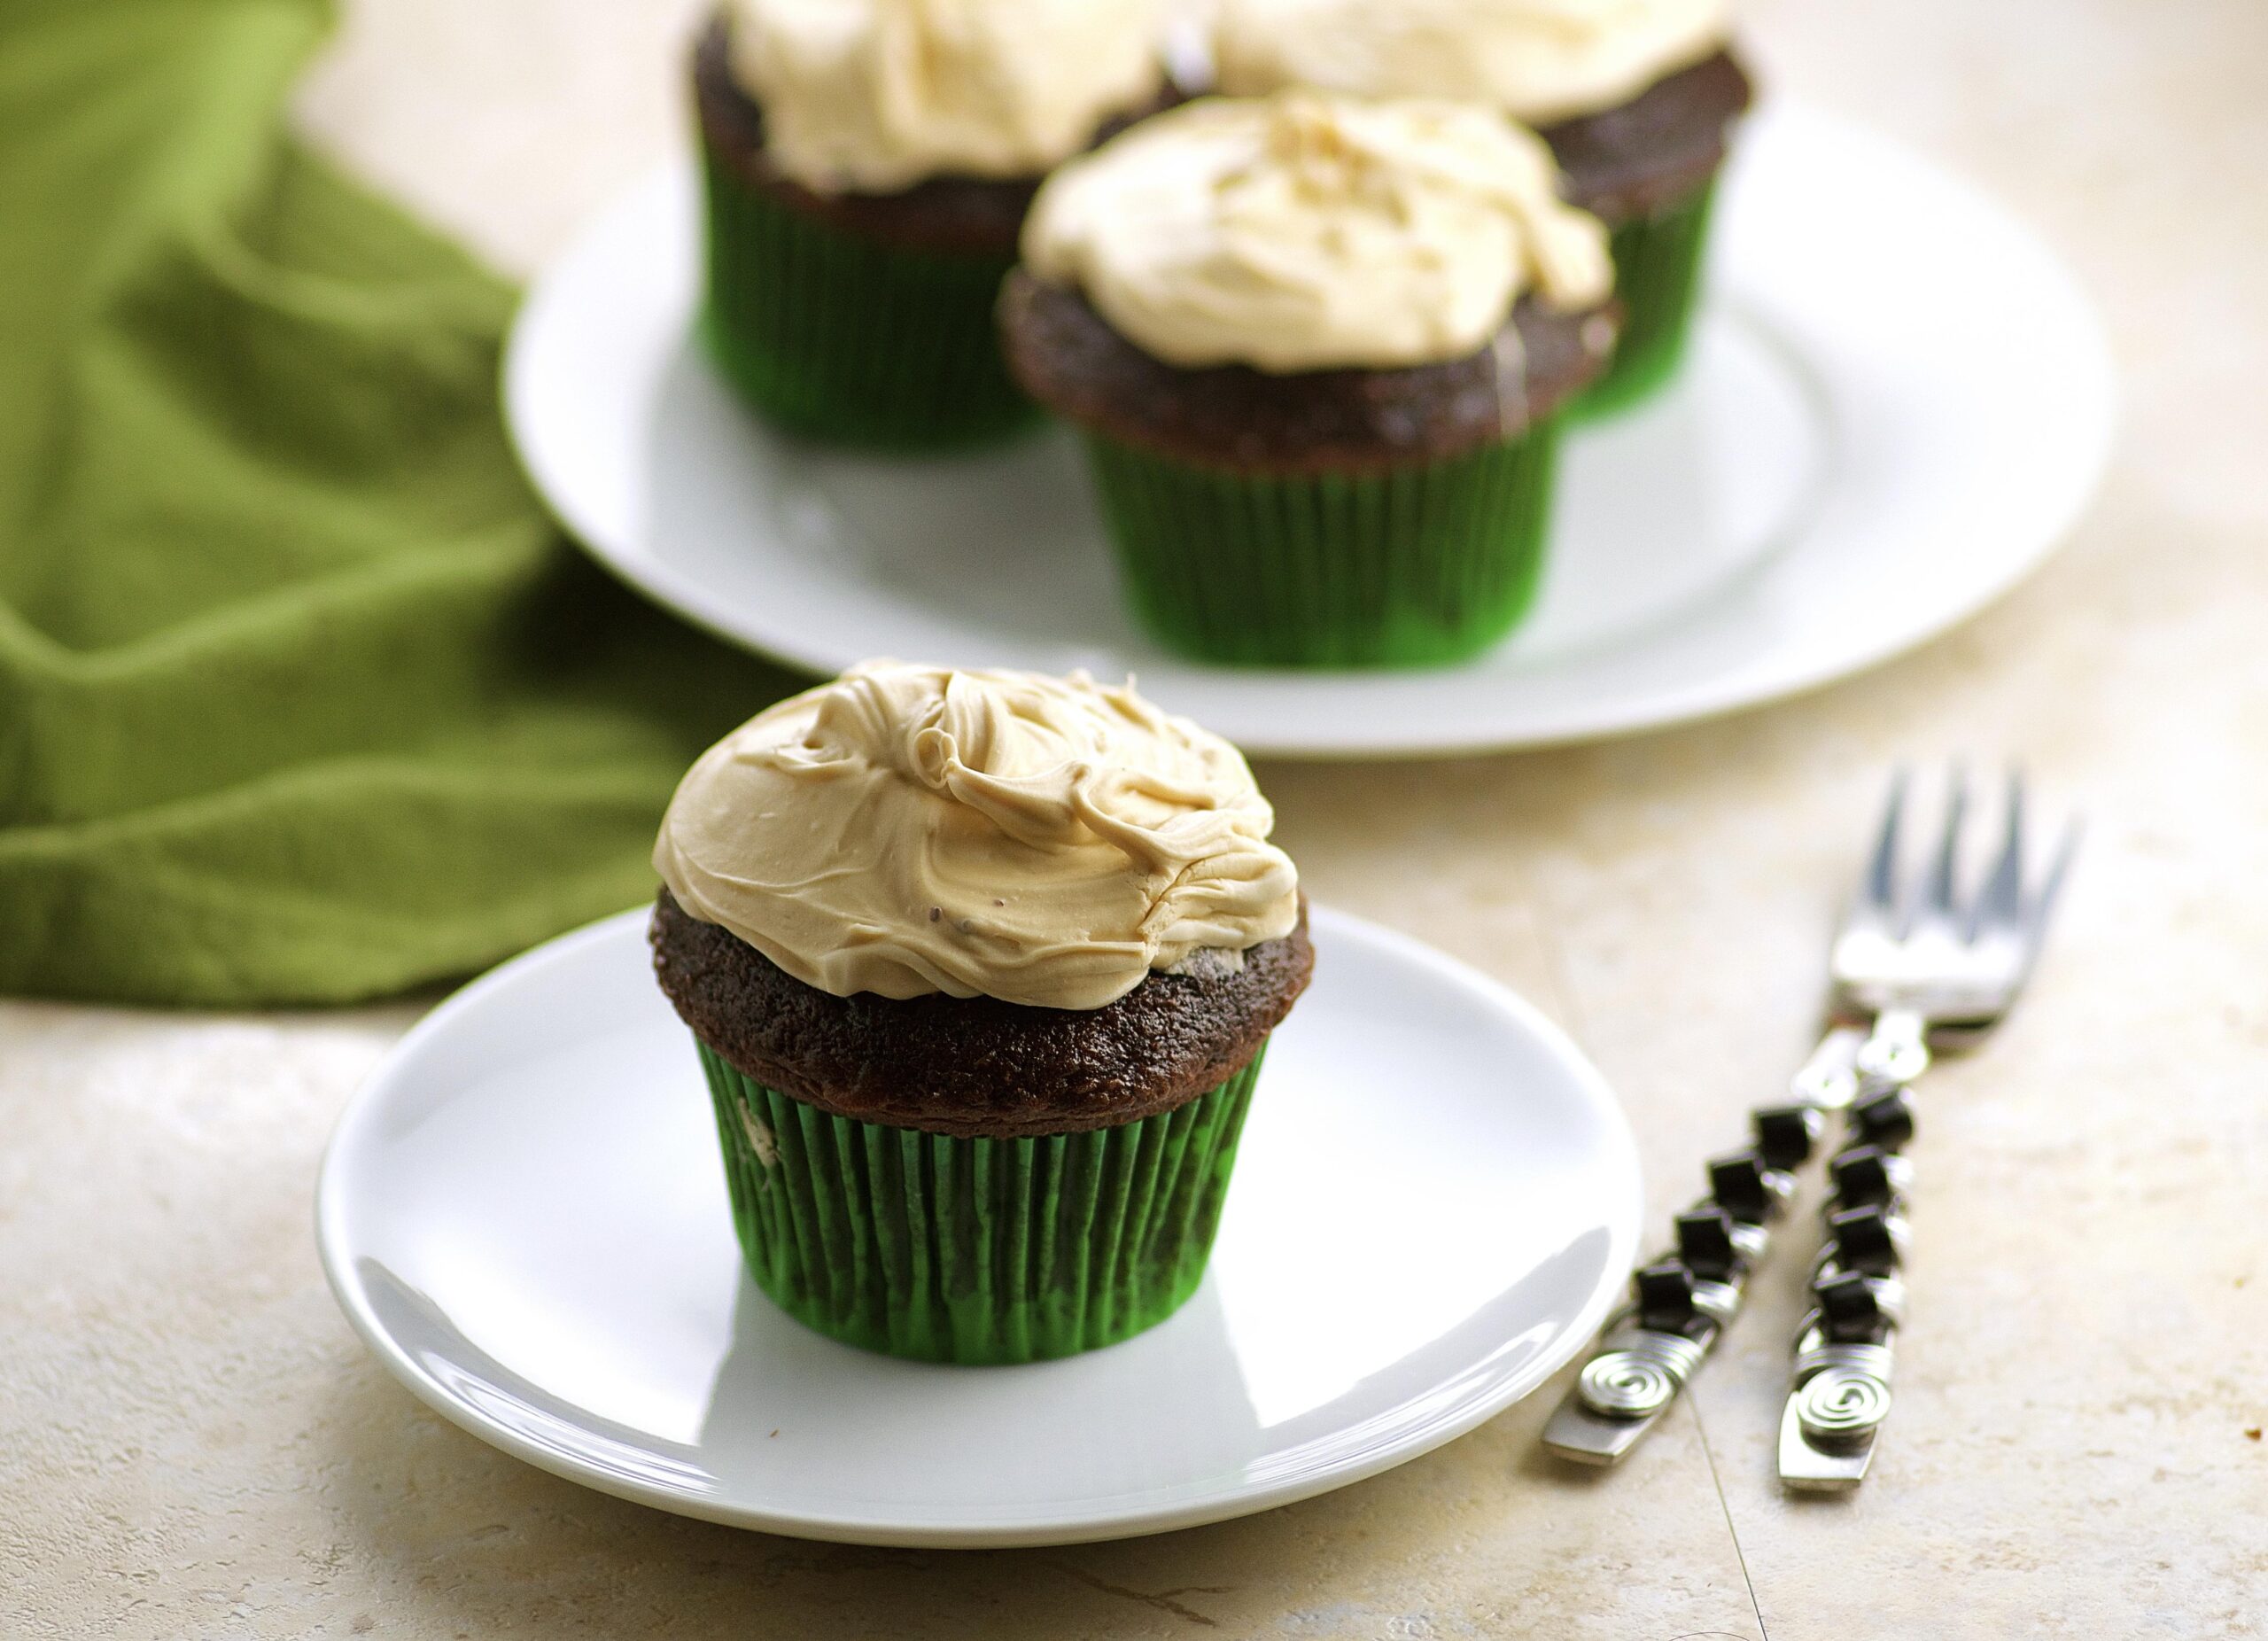  Perfect for National Cupcake Day or St. Patrick's Day celebrations.